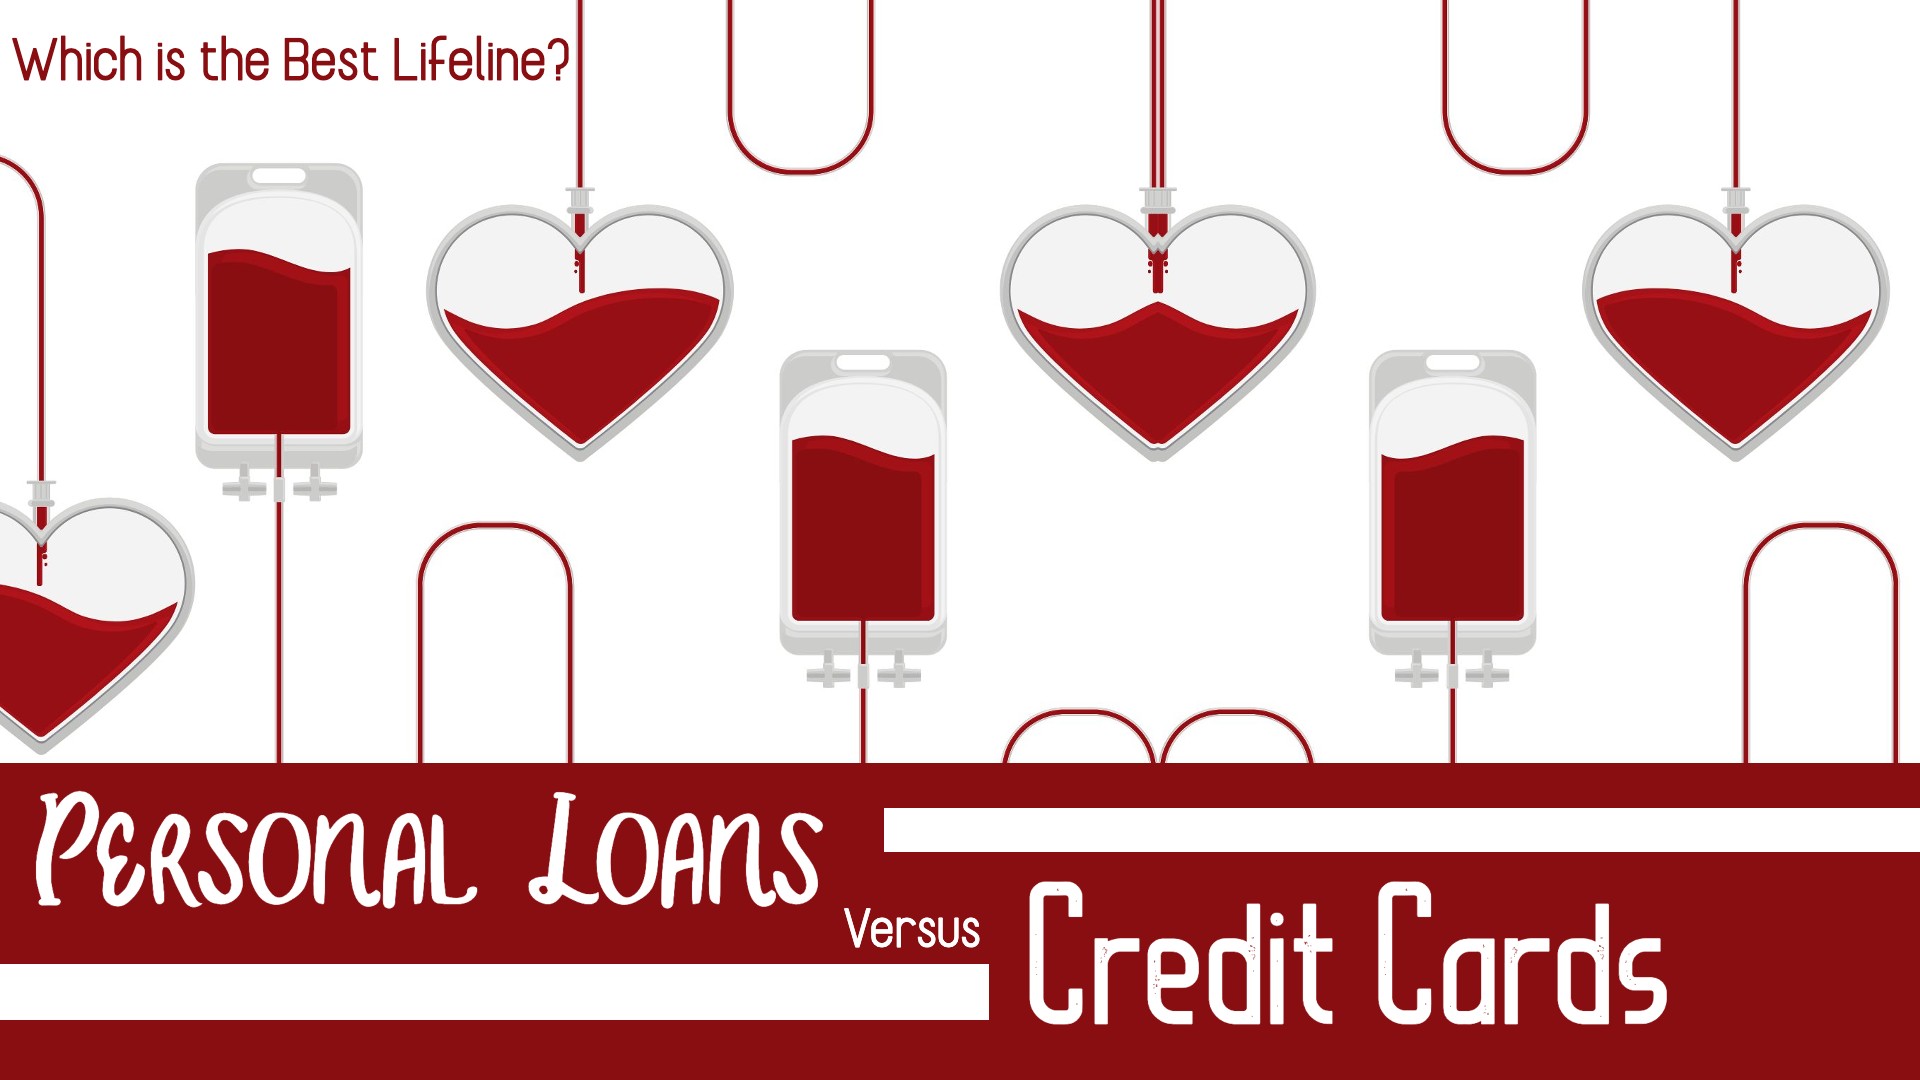 Personal Loans vs. Credit Cards